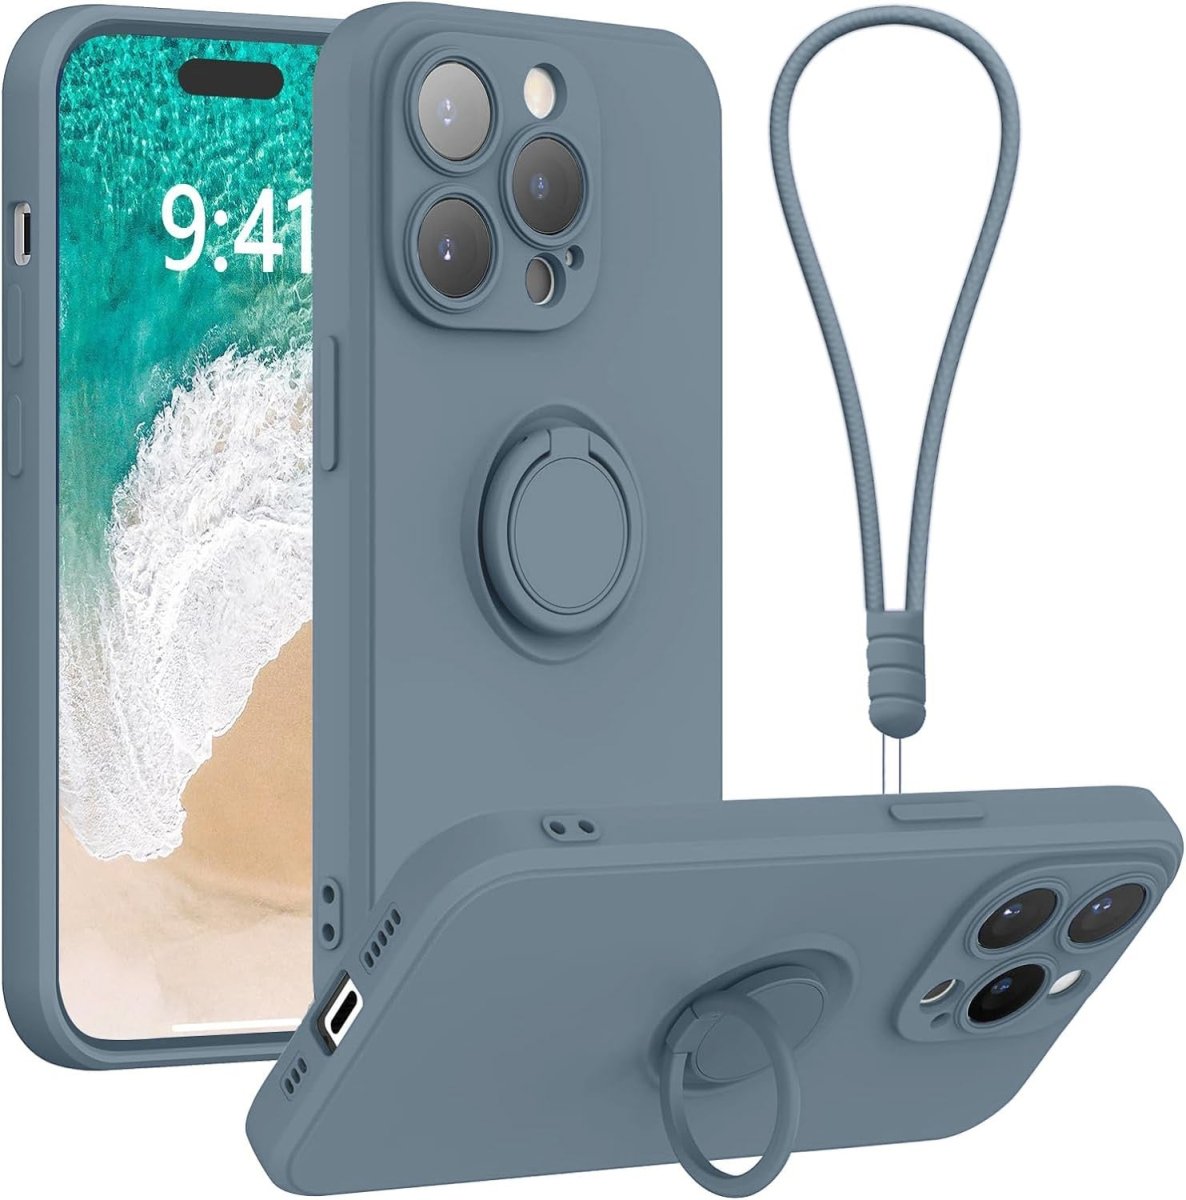 Blue Fog Shockproof Silicone Case For iPhone With Ring And Lanyard  Blue Fog iPhone 11 Accessories Gifts UK